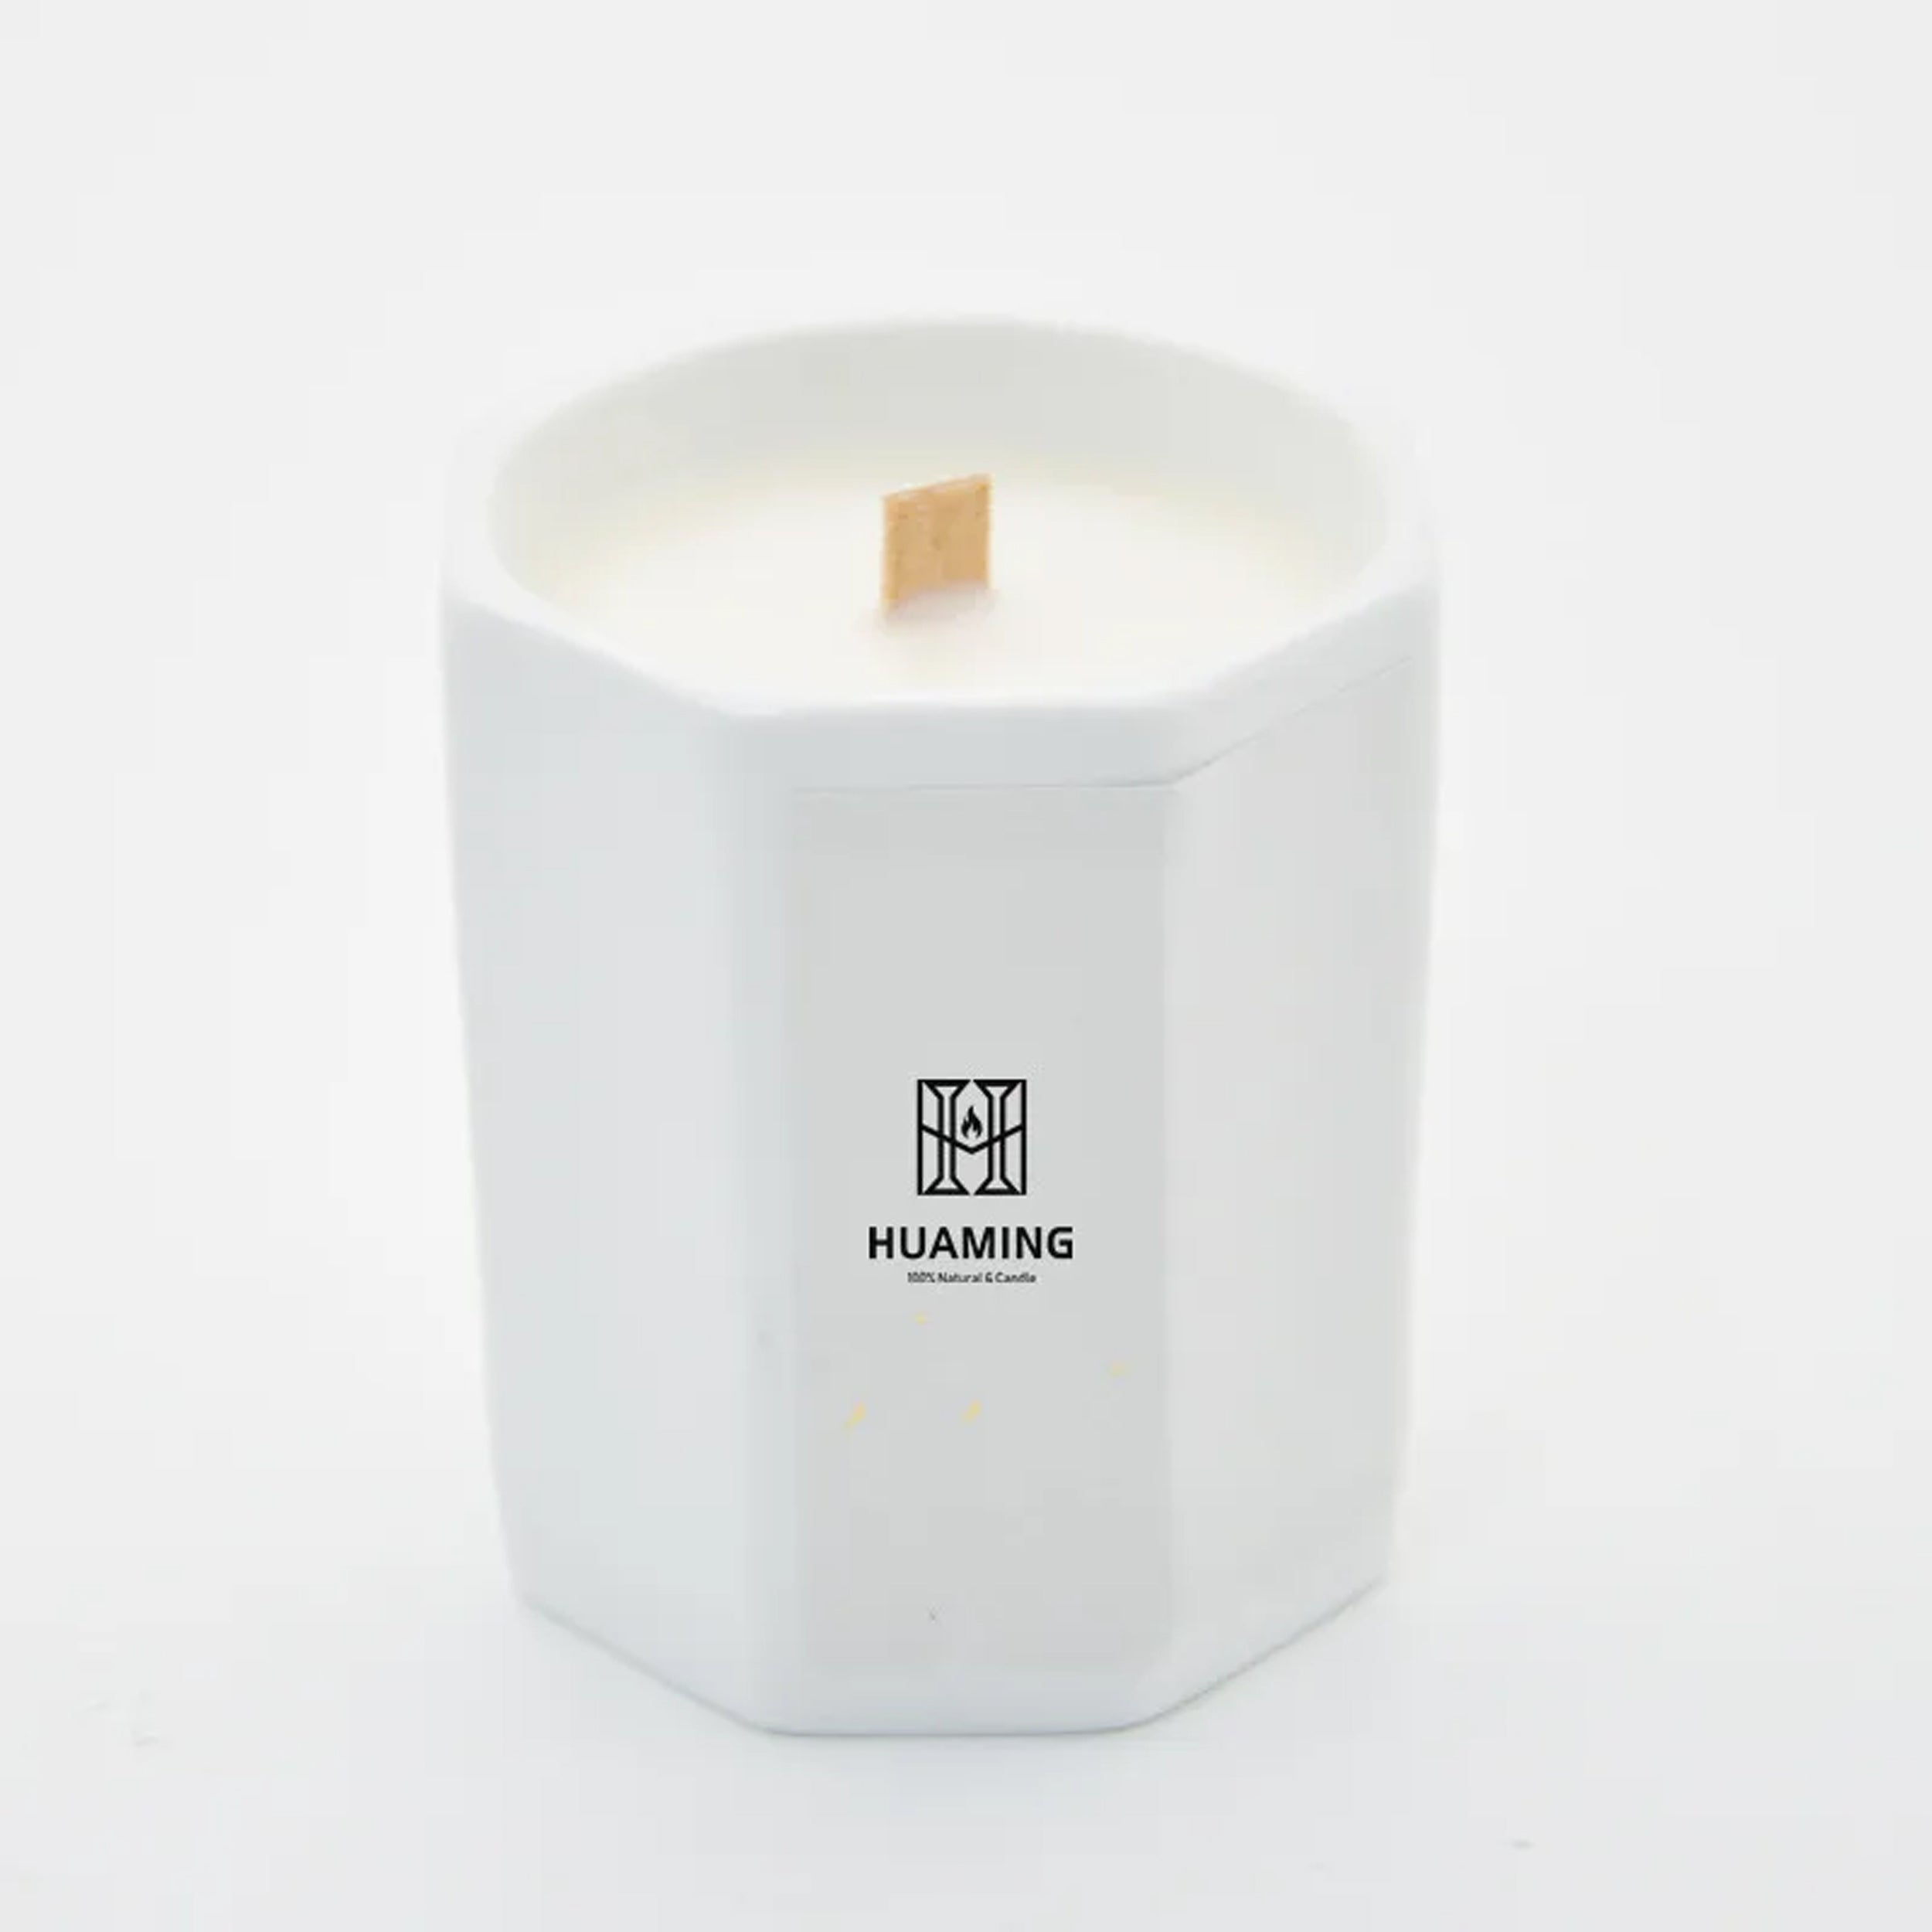 Premium Soy Wax Wood Wick Aromatherapy Candles for Enhance Your Mood